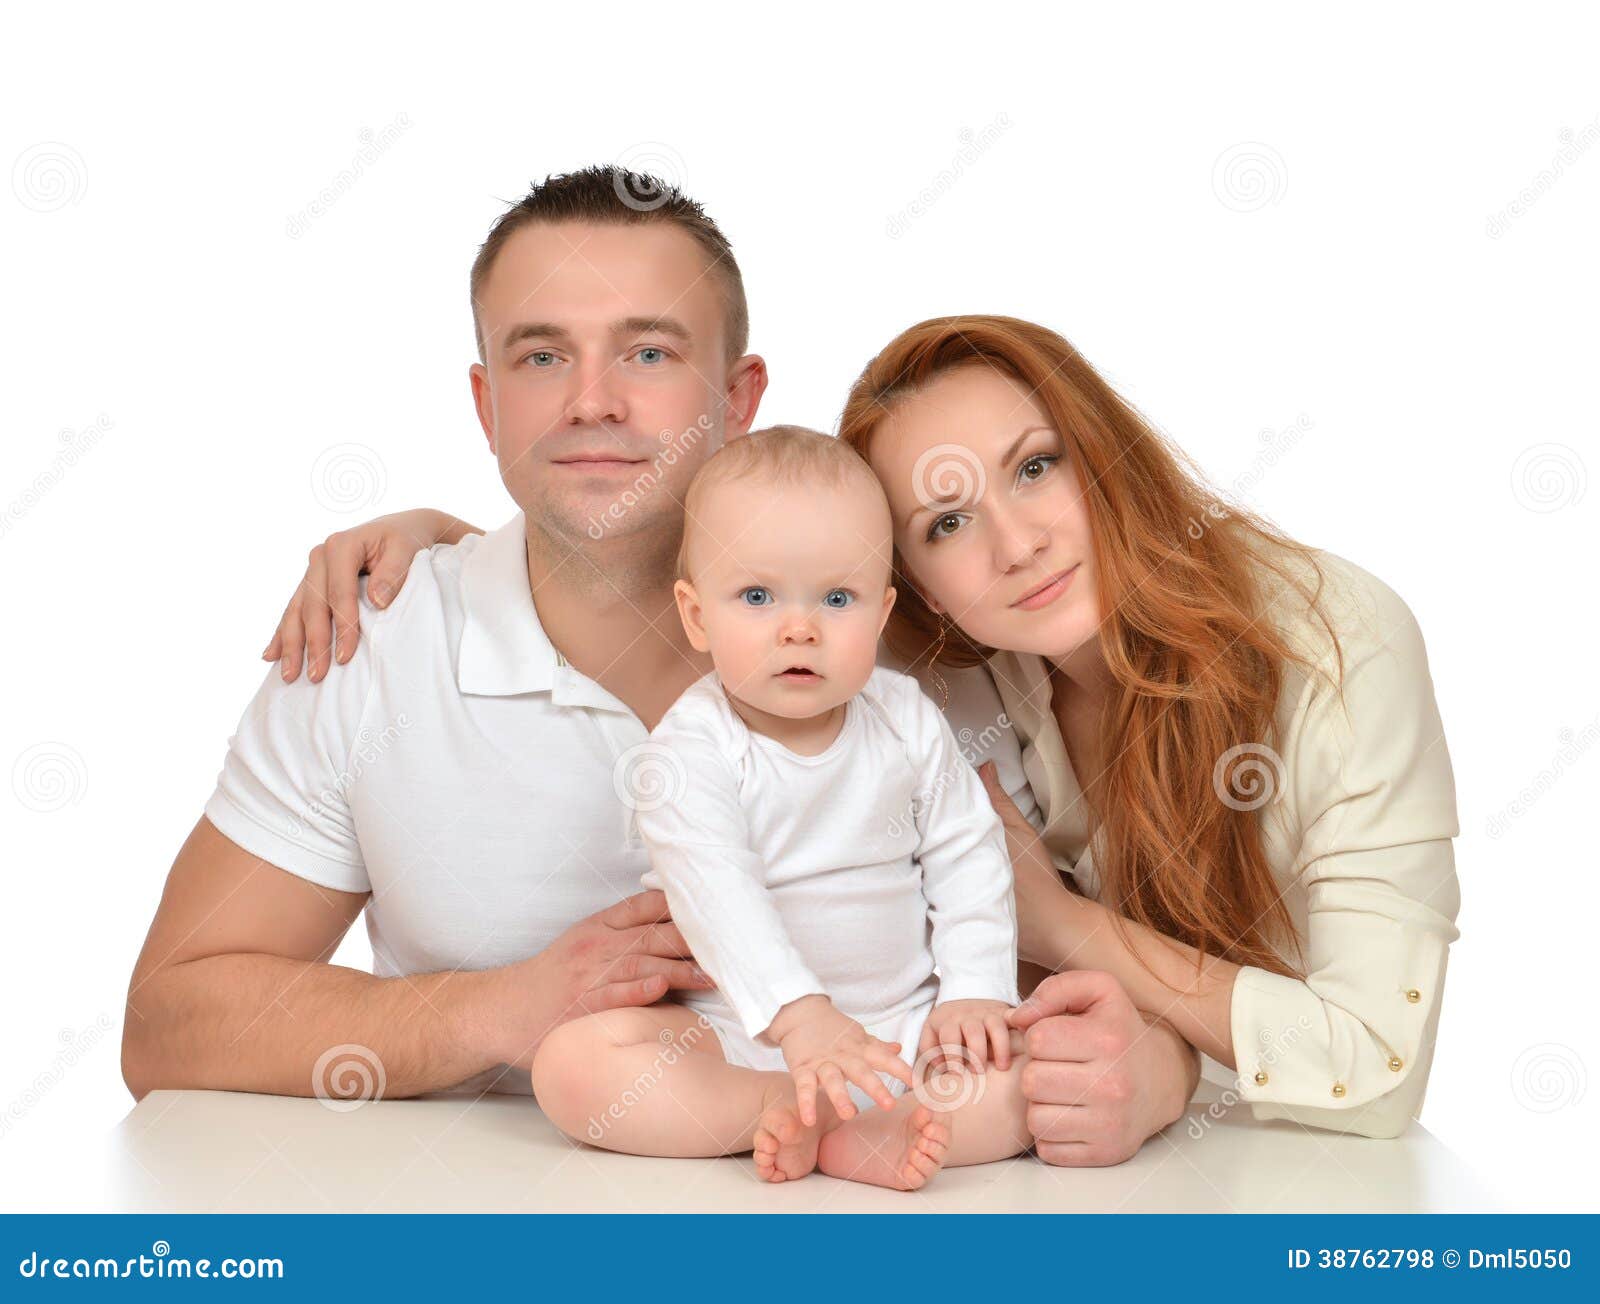 young family newborn child baby girl mother father toddler isolated white background 38762798